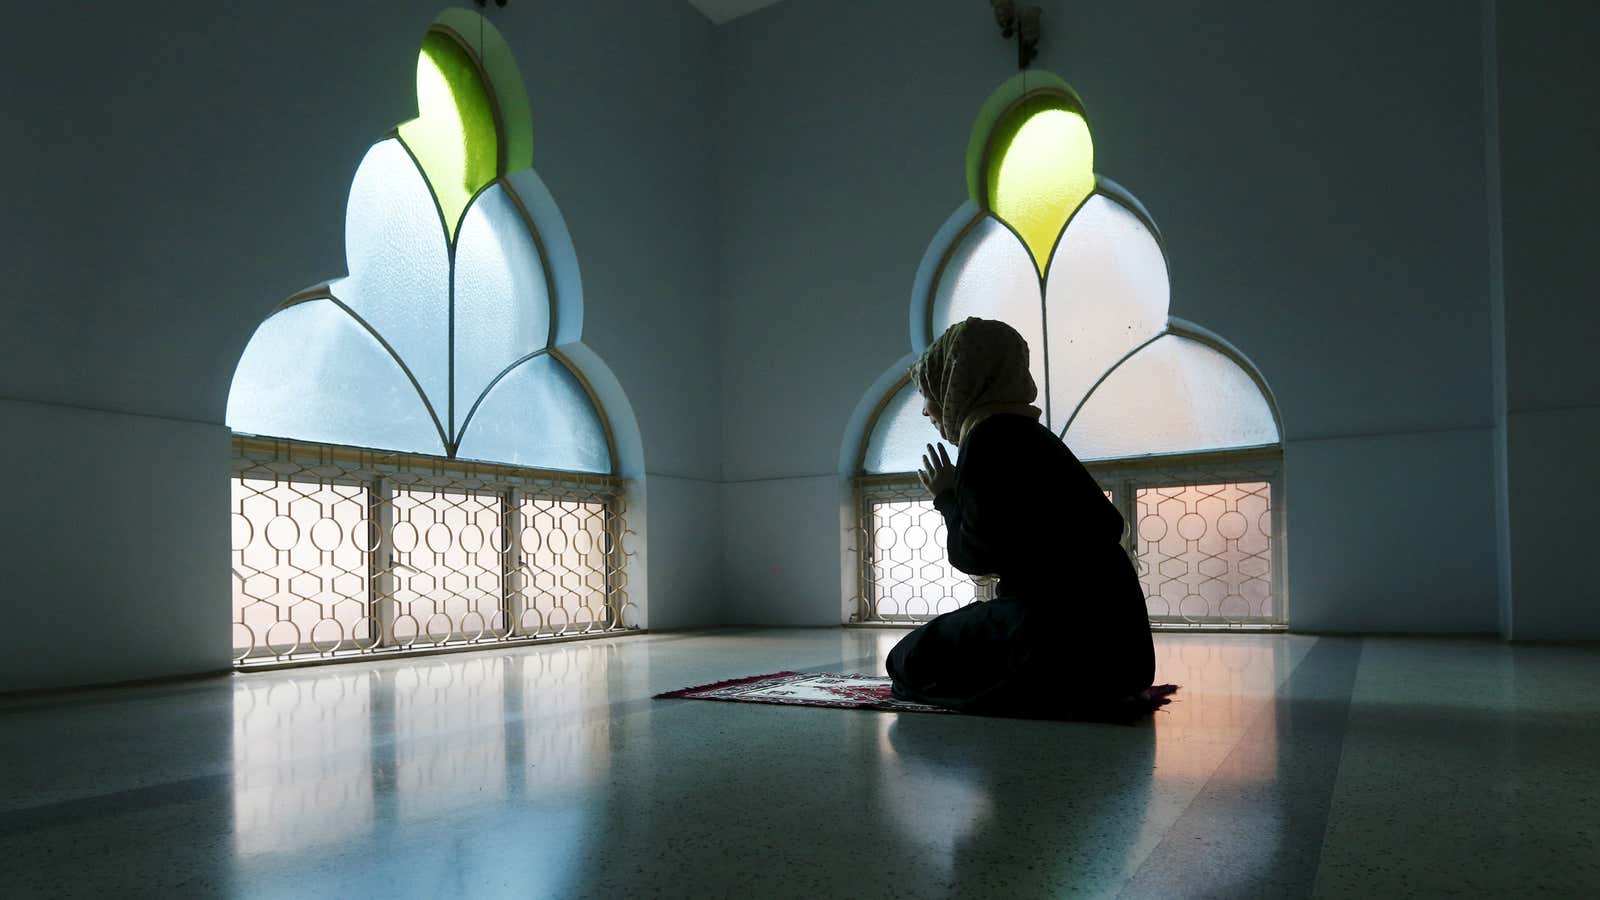 The mosque will only have female imams.